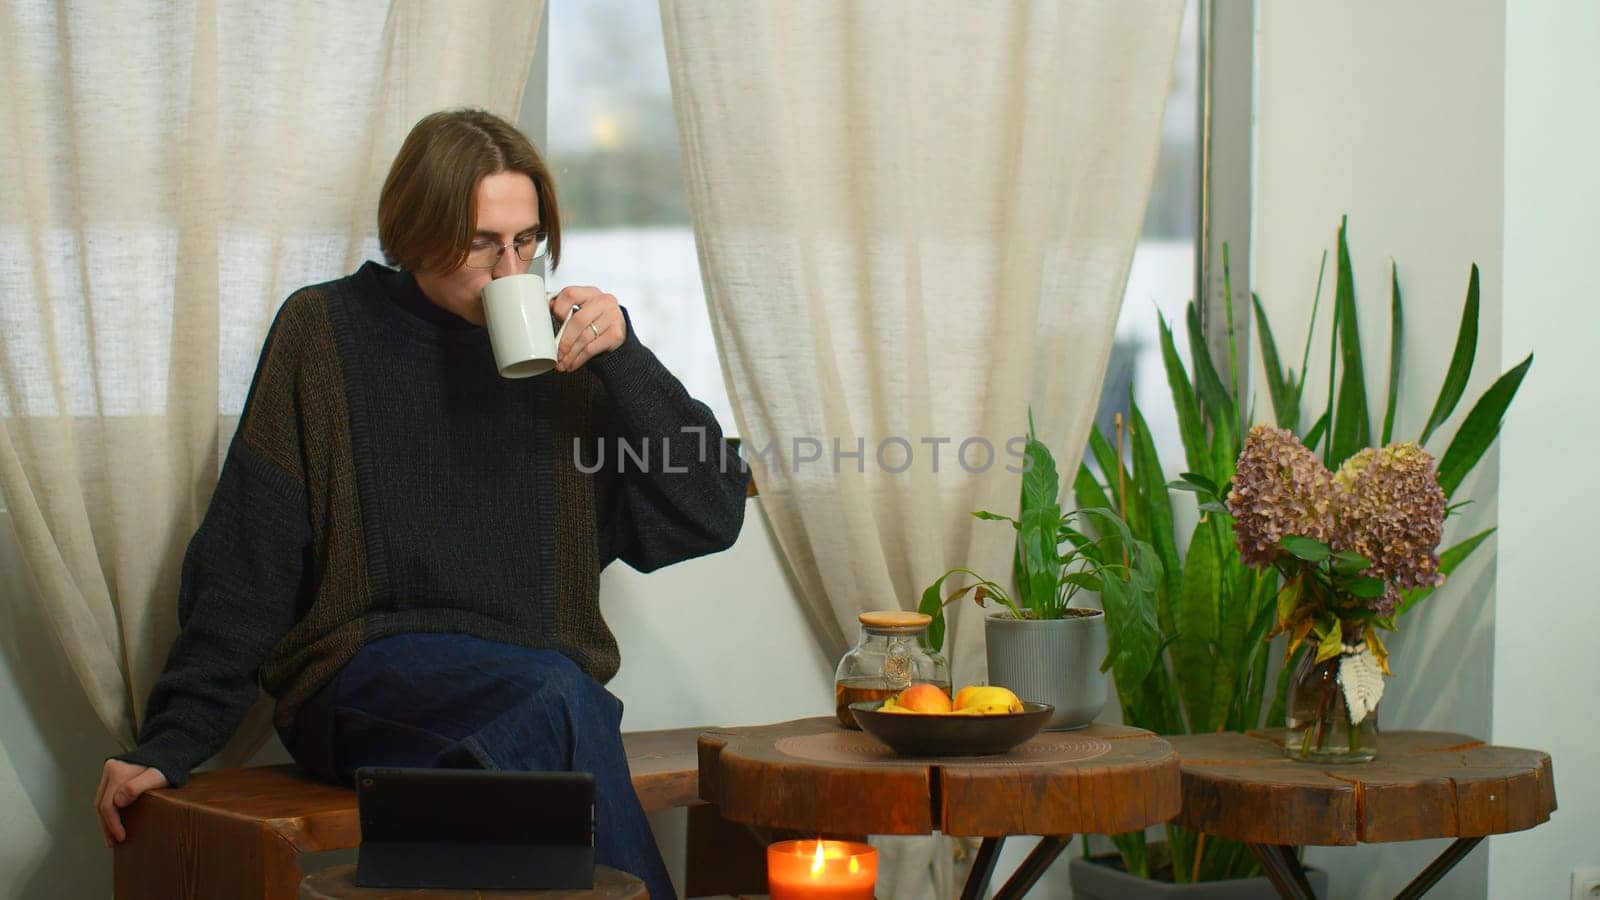 Handsome student drinks tea and looks at tablet in cafe. Media. Young man with glasses is watching lecture on tablet in cafe. Young man is relaxing and studying in cozy cafe.